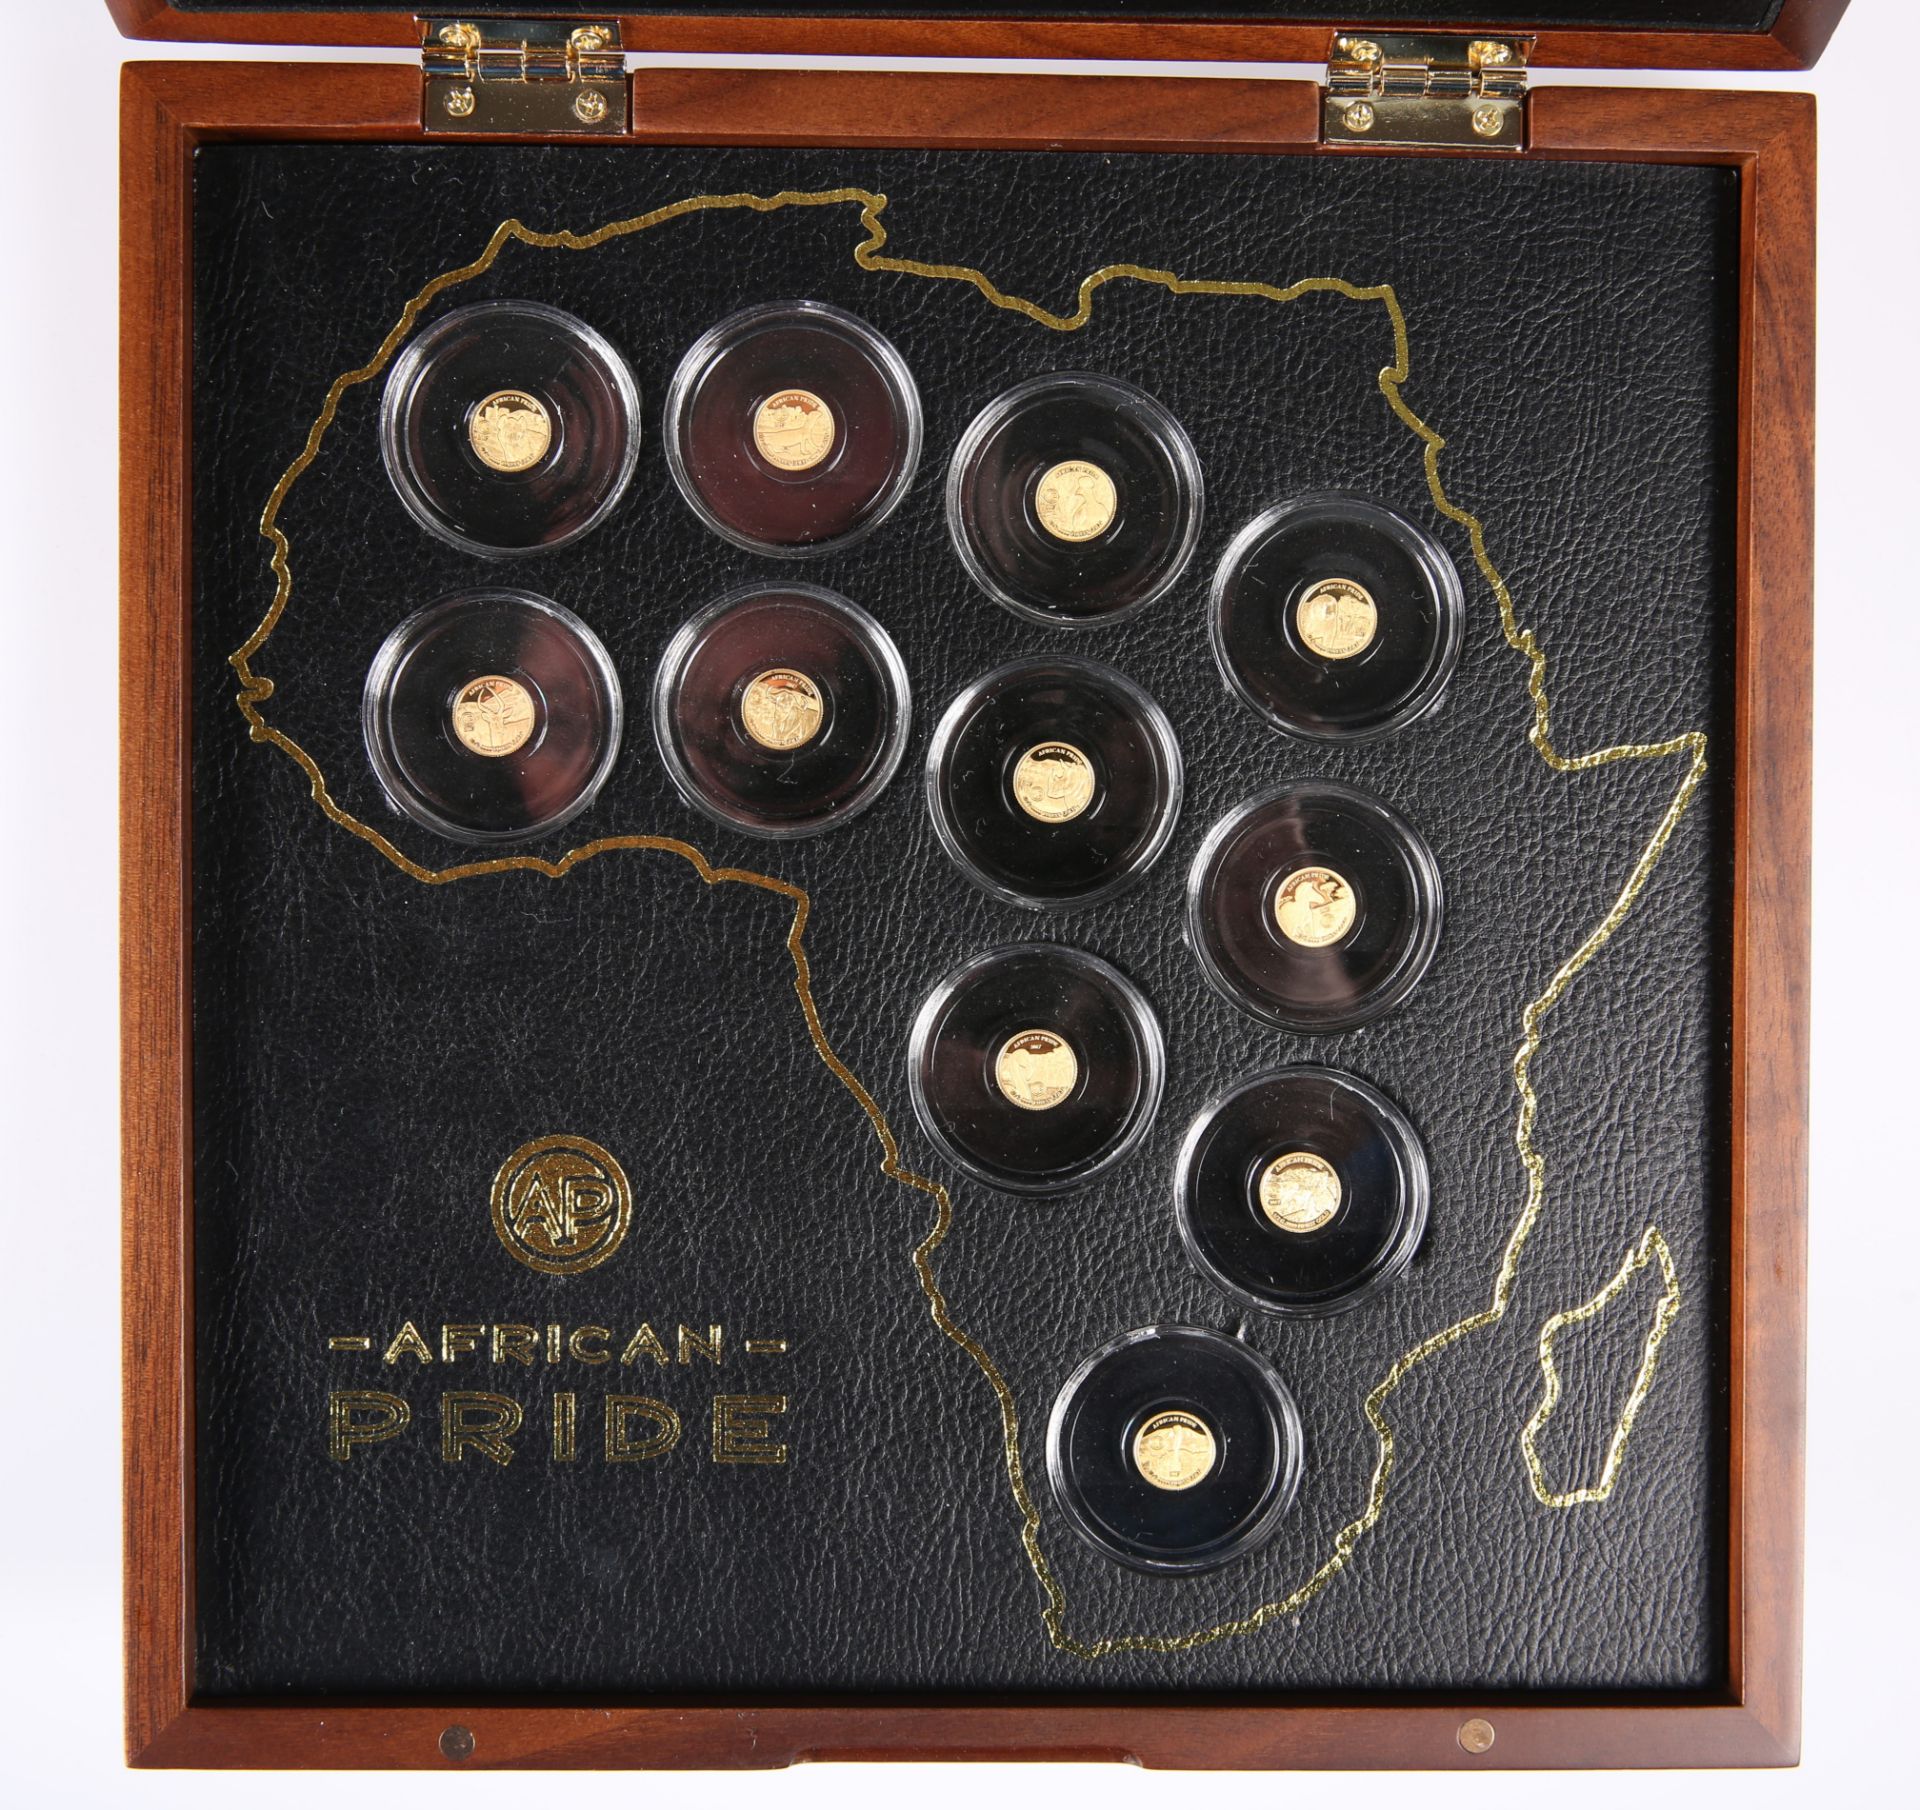 A 2017 ELEVEN COIN GOLD PROOFSET, "AFRICAN PRIDE", no. 00015, in presentation case, with outer